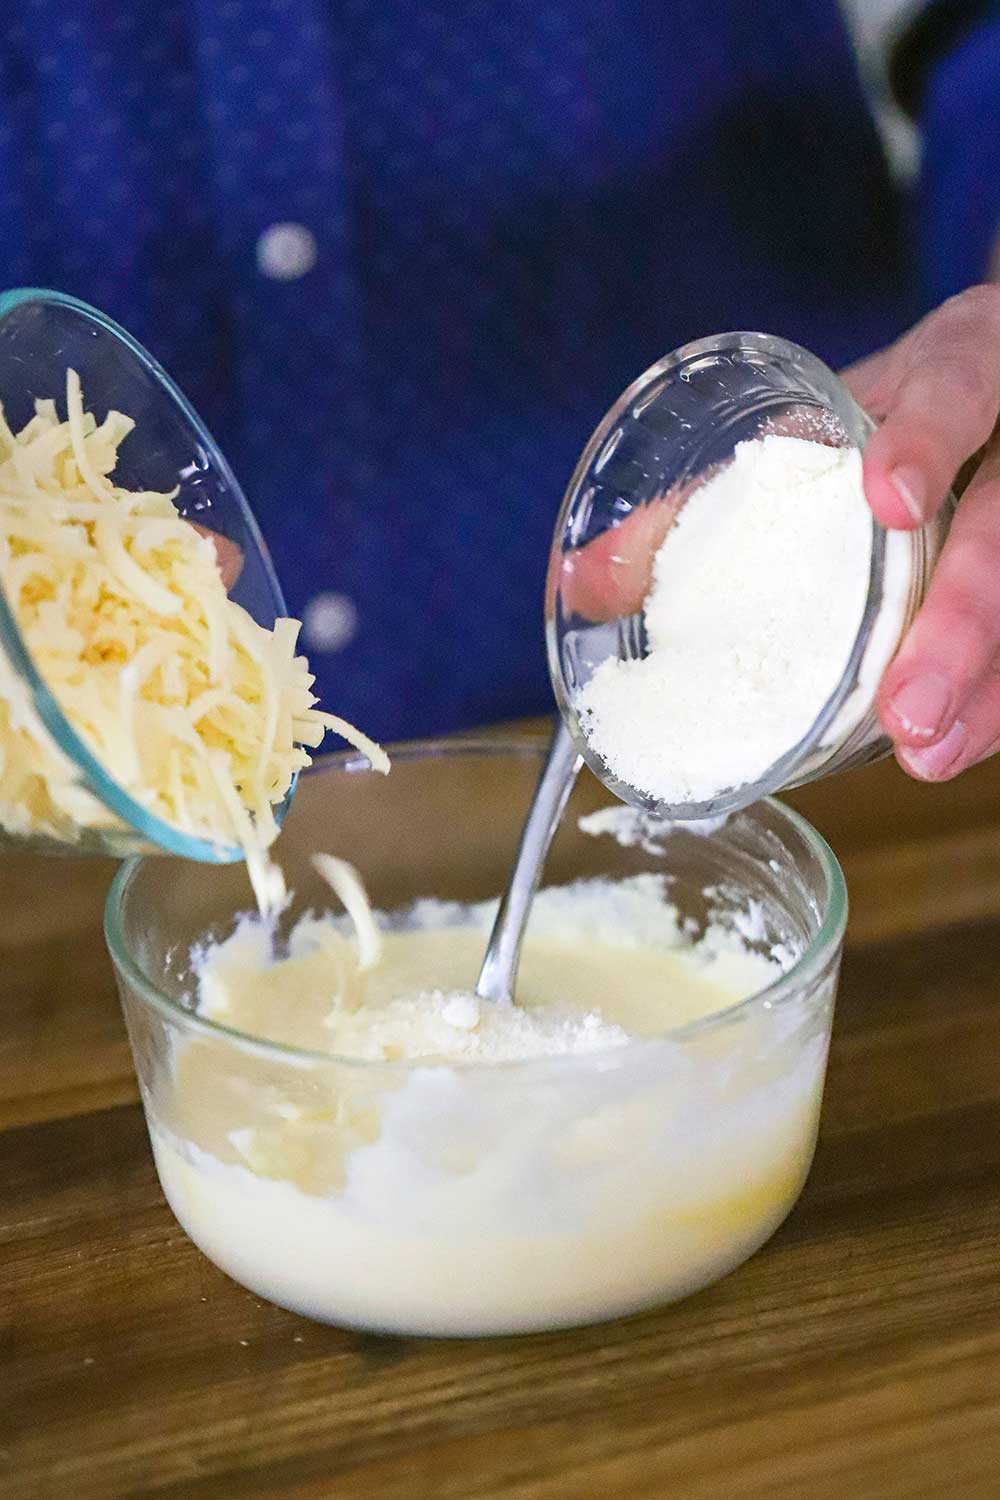 A person using two hands to dump shredded mozzarella in a small bowl in one hand and grated parmesan from a bowl in the other hand into a bowl of ricotta. 